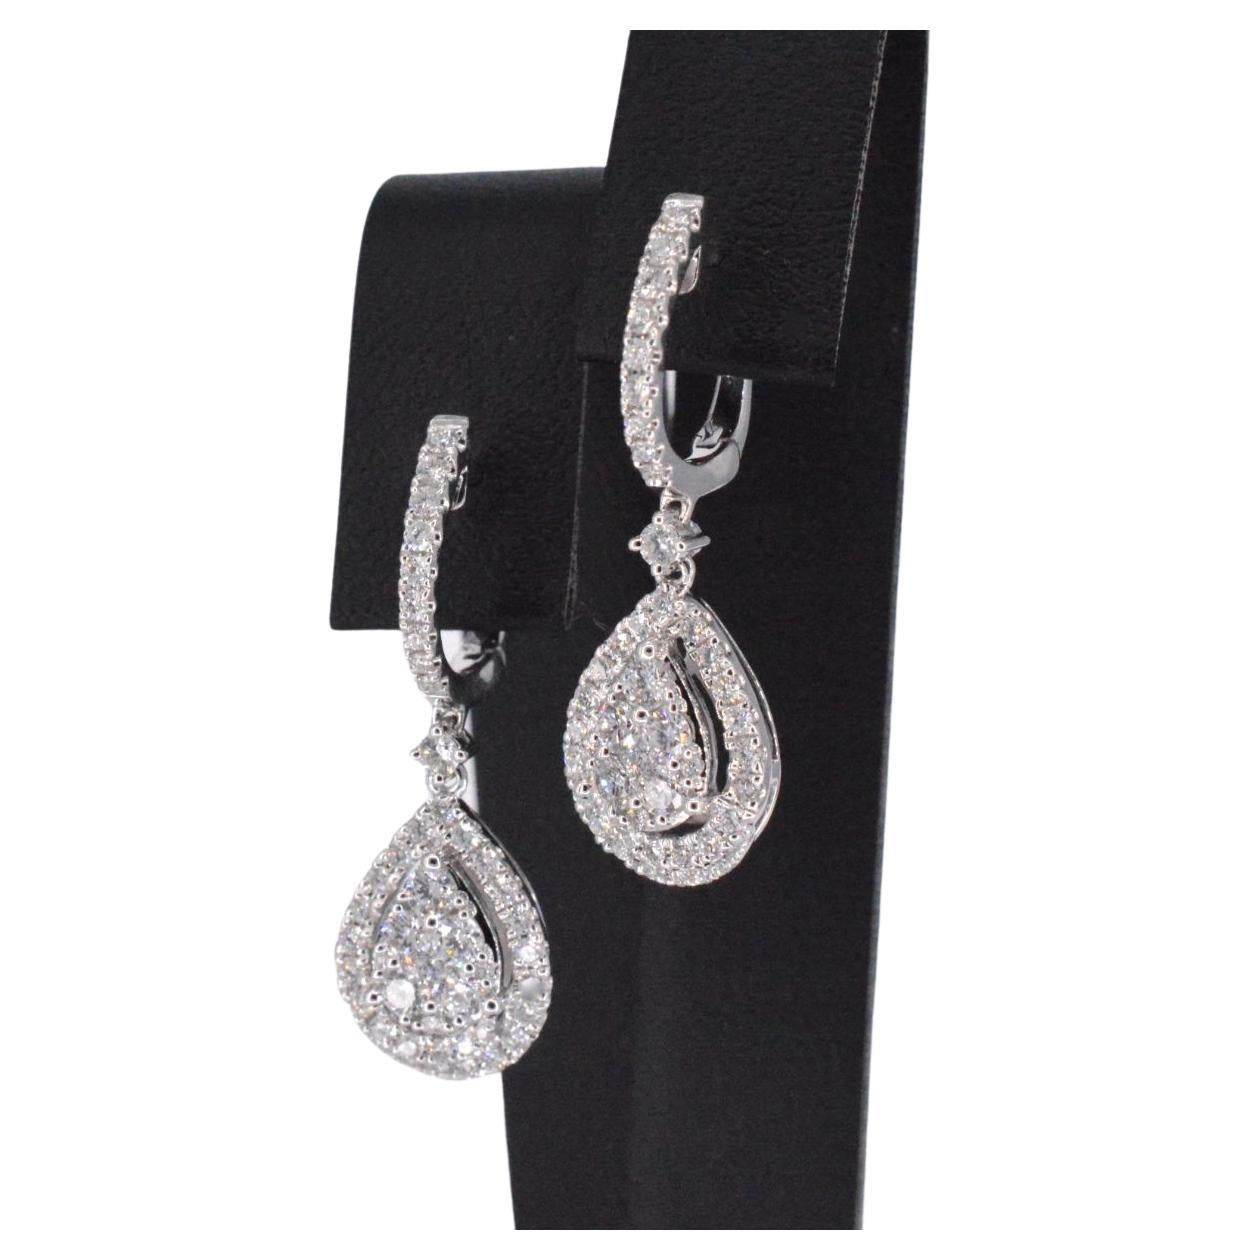 Introducing our exquisite drop-shaped earrings, fitted with stunningly brilliant cut diamonds that are naturally shiny. The diamonds have a combined weight of 1.50 carats, with a F-G color grade and VS clarity. Crafted from high-quality 18K gold